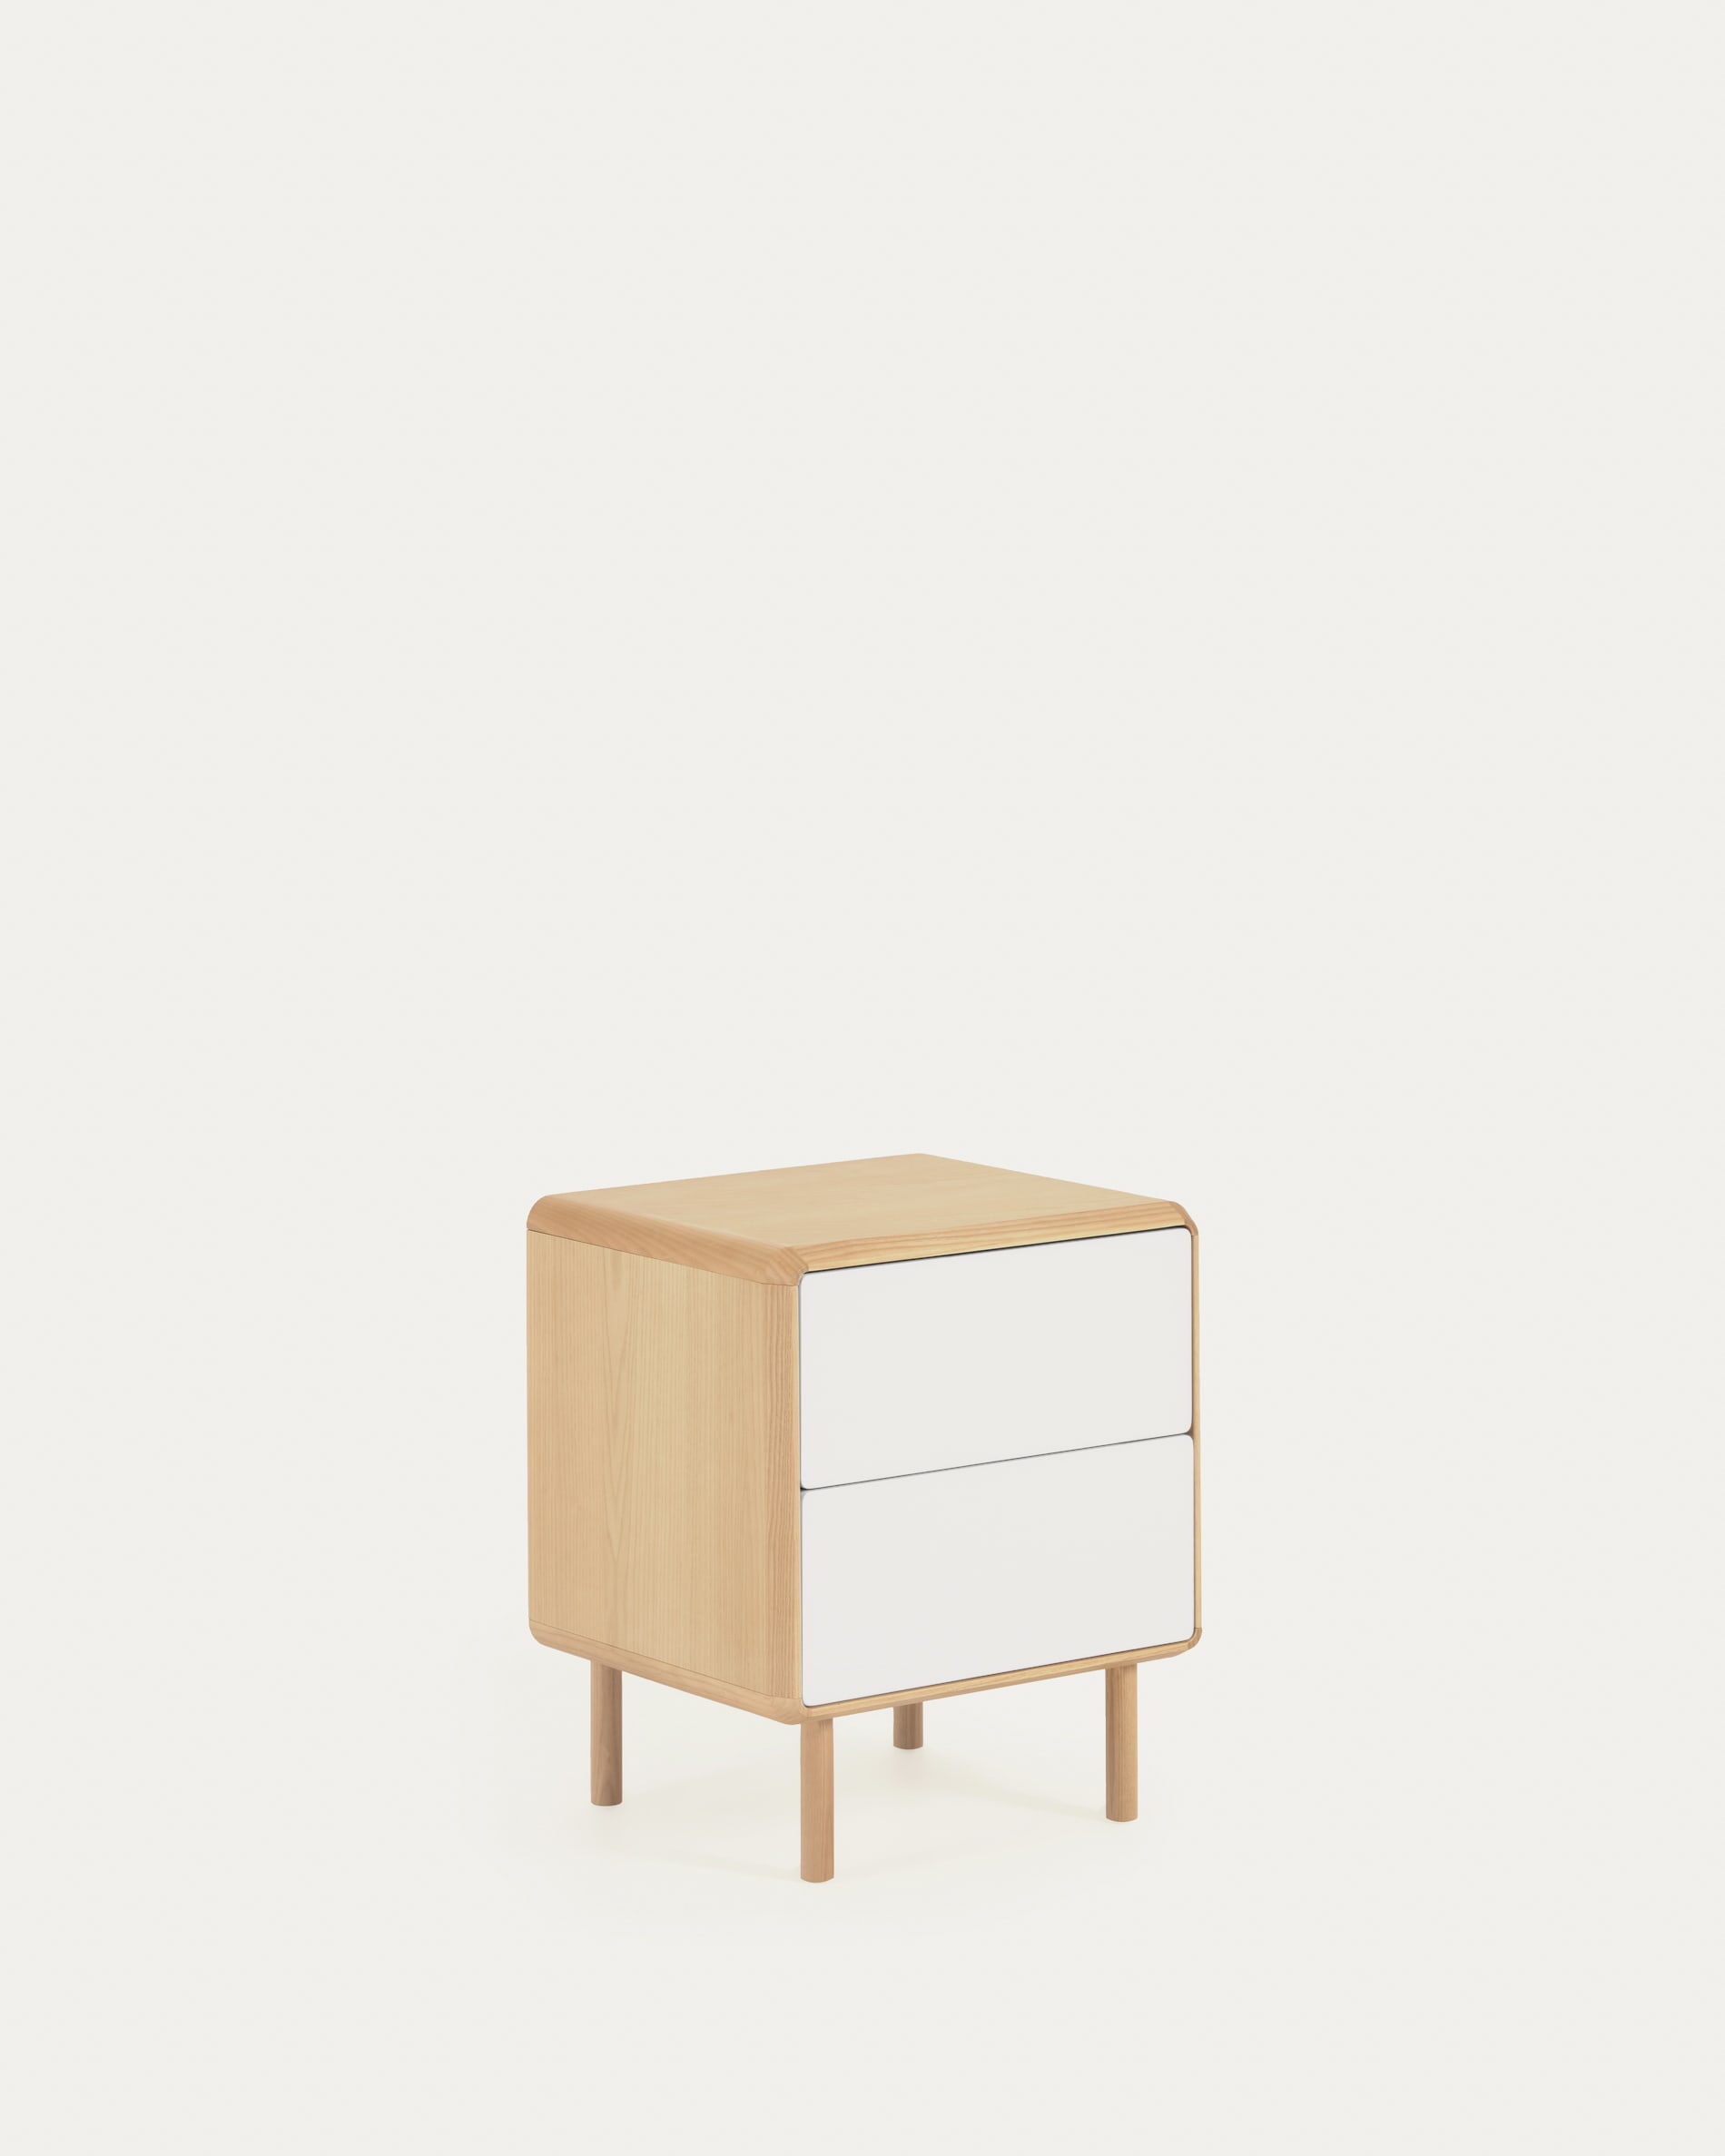 Anielle solid and ash veneer bedside table 50 x 584 cm | Kave Home